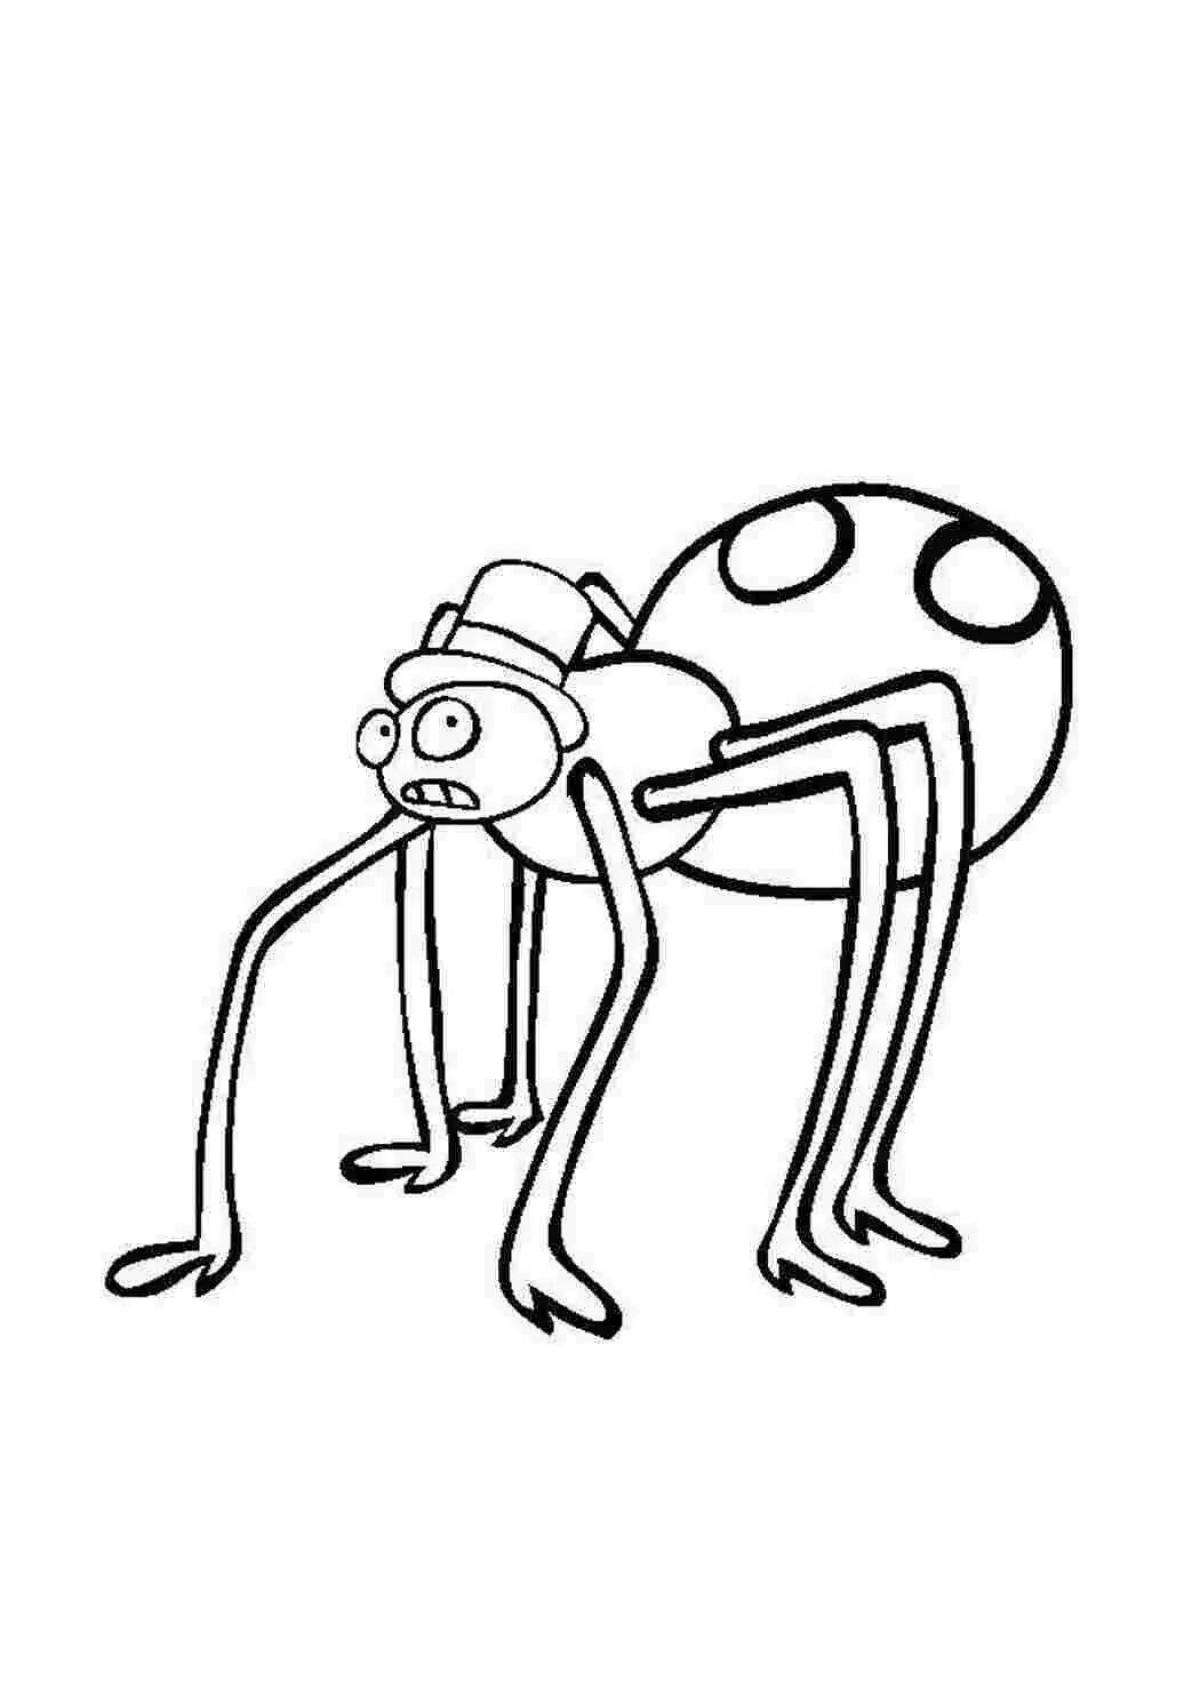 Exciting spider coloring book